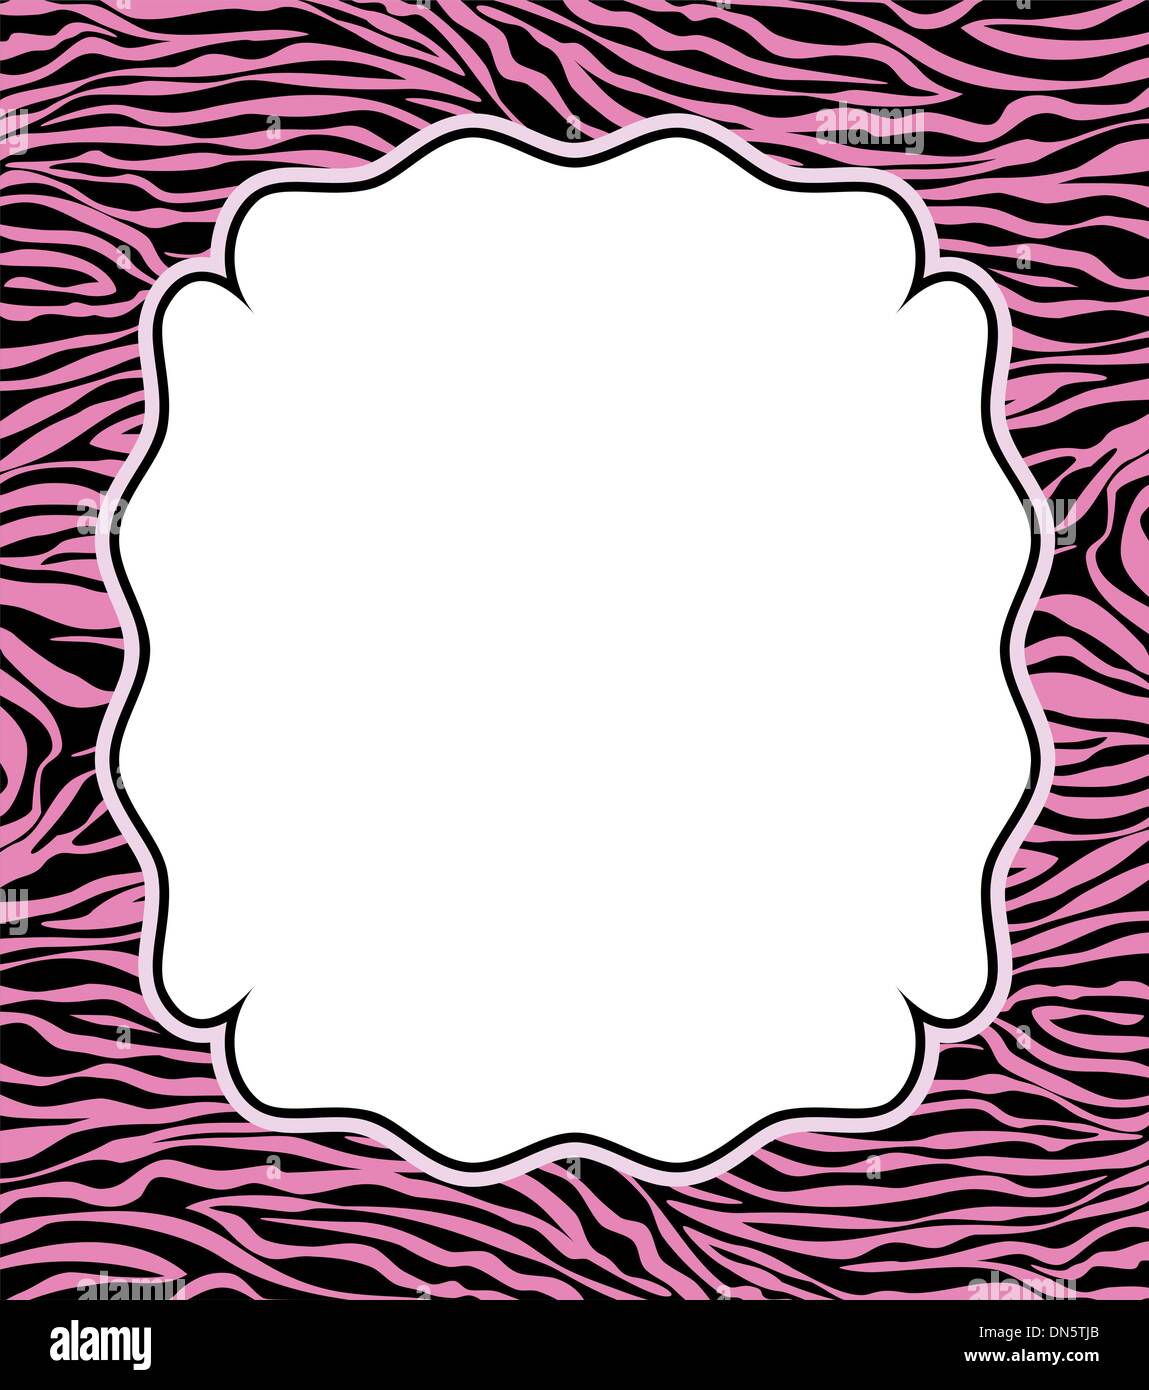 vector frame with abstract zebra skin texture Stock Vector